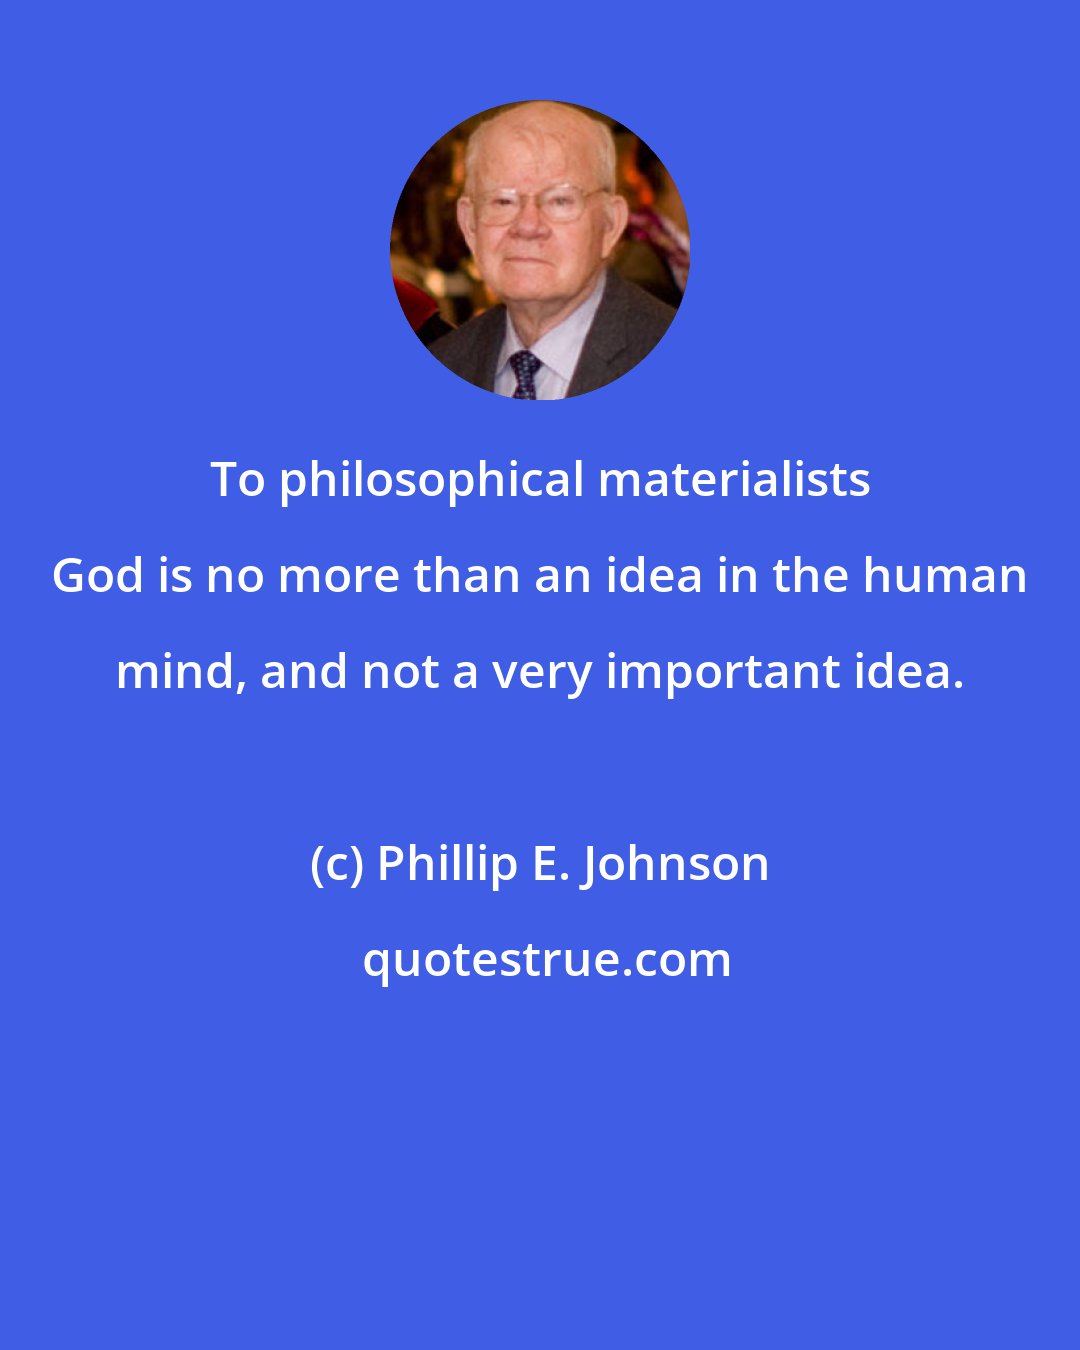 Phillip E. Johnson: To philosophical materialists God is no more than an idea in the human mind, and not a very important idea.